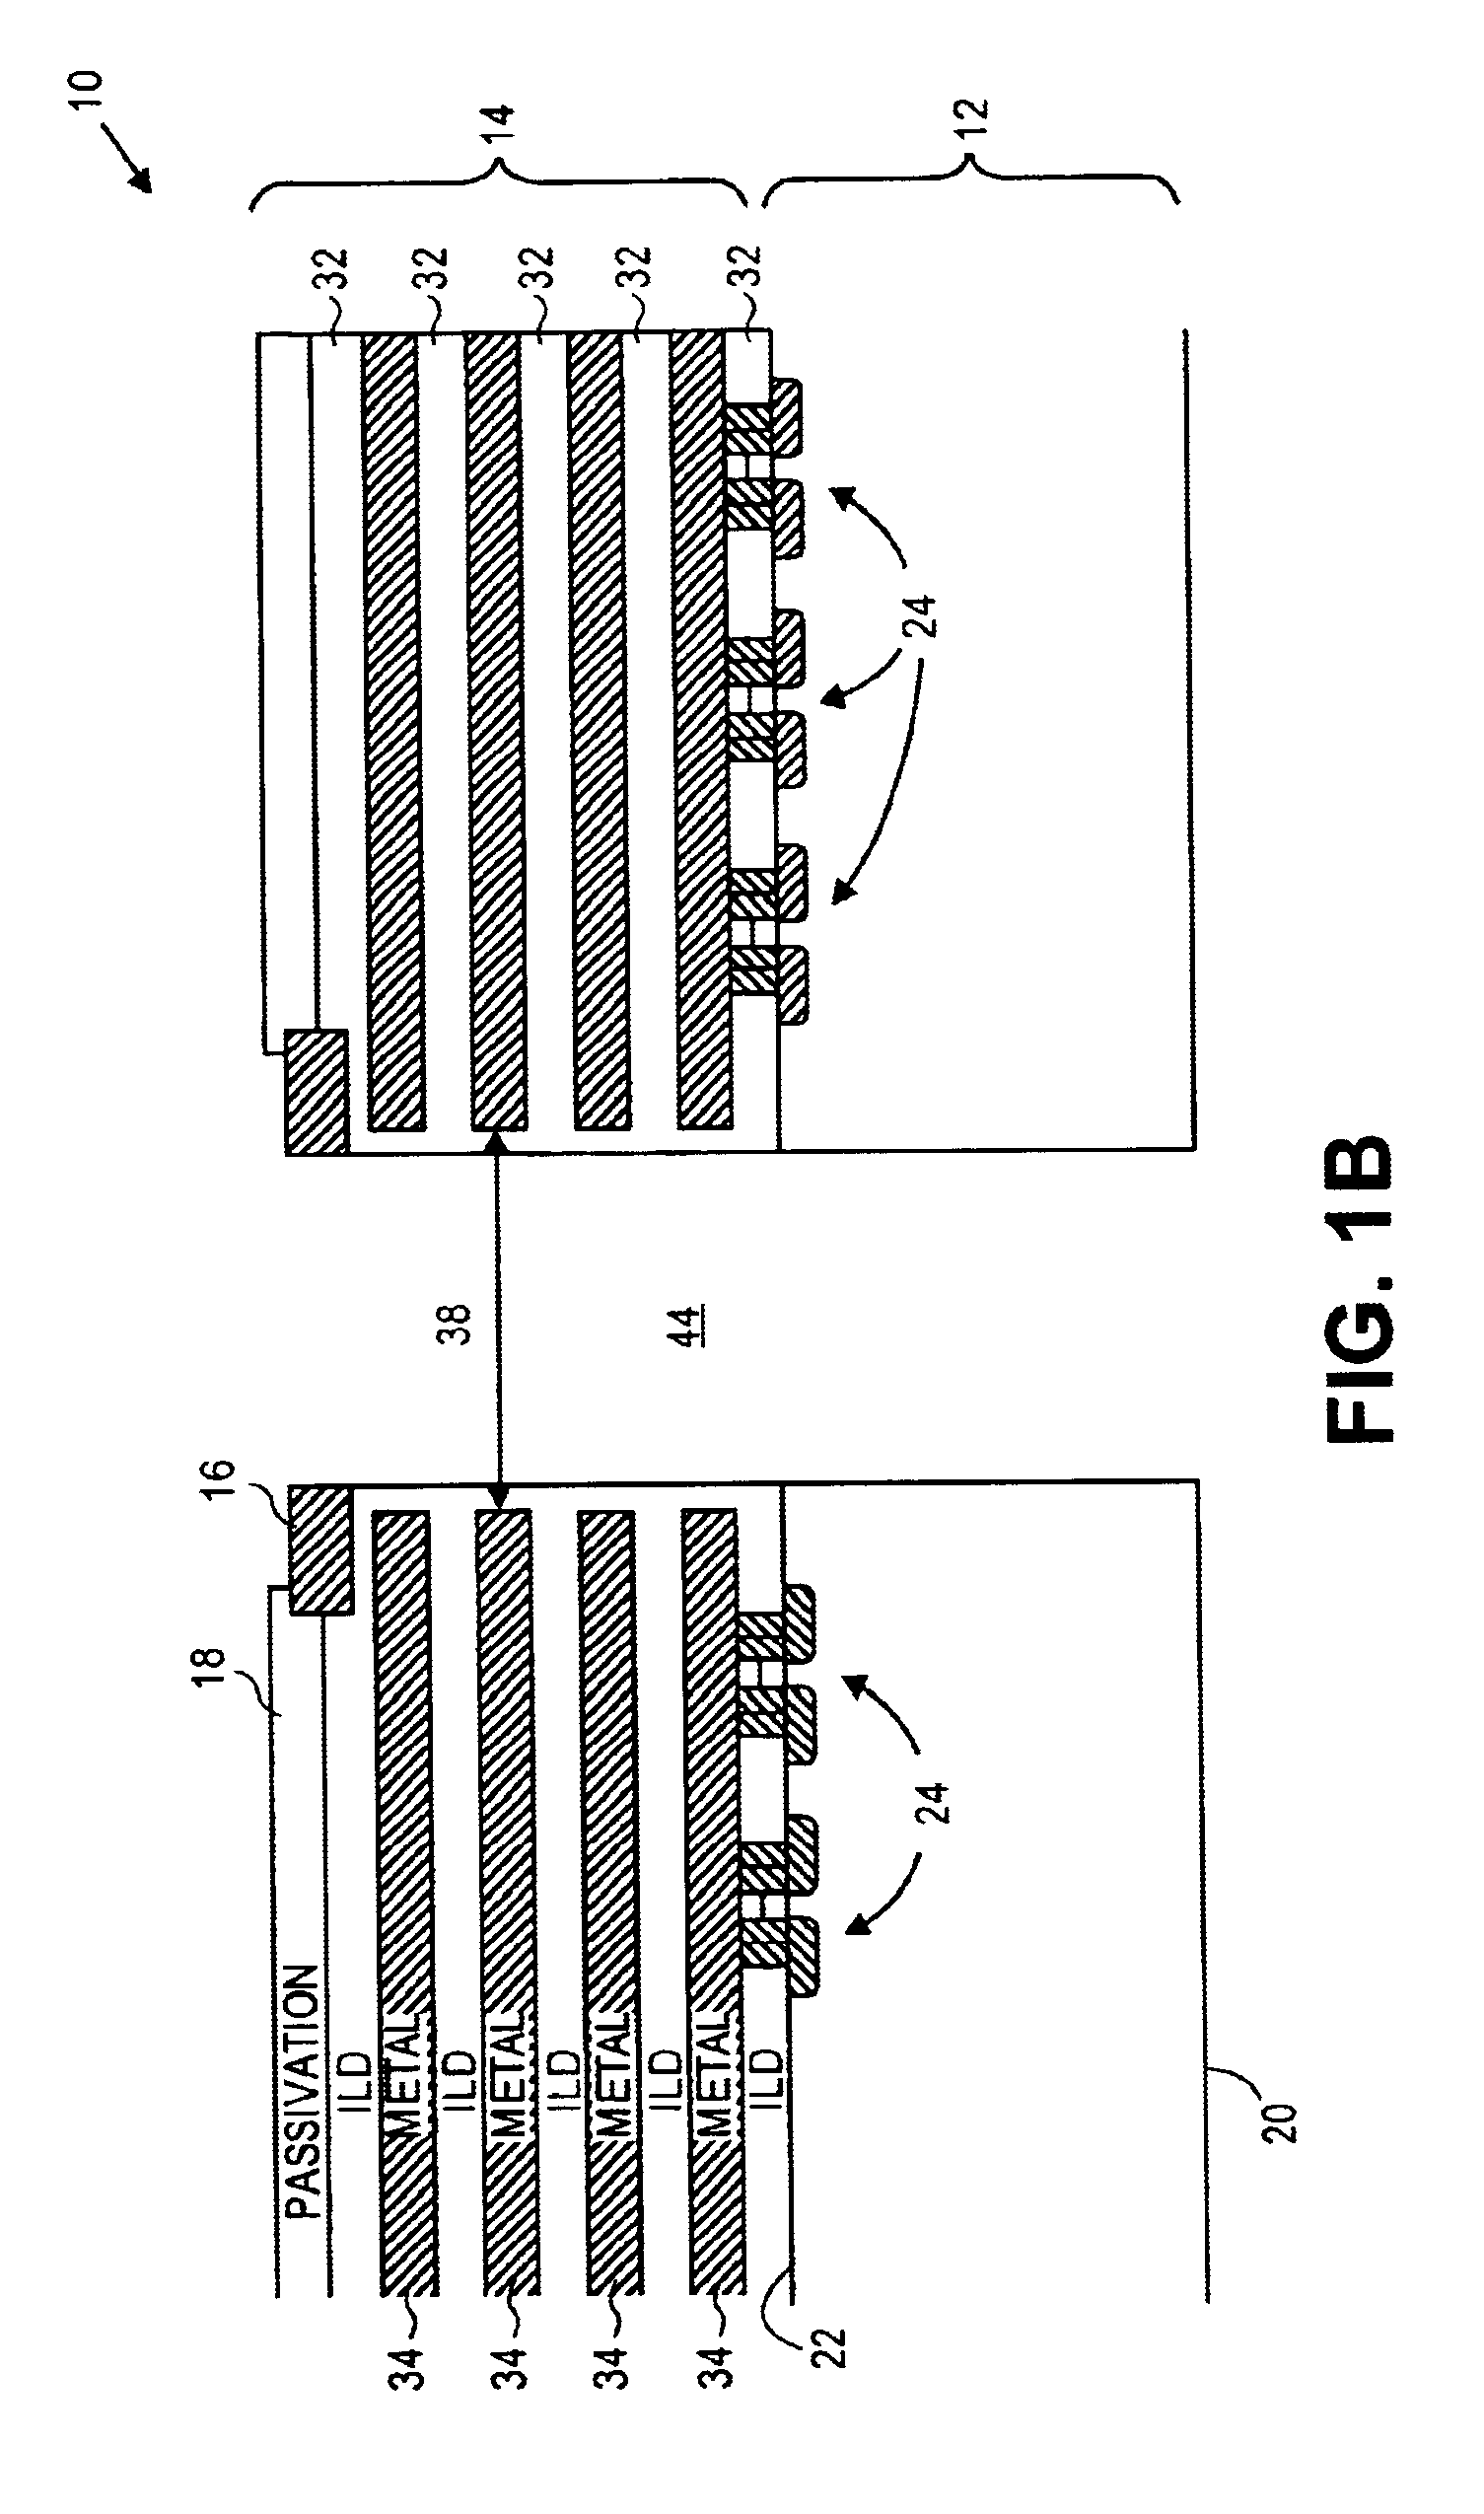 Integrated circuit die and an electronic assembly having a three-dimensional interconnection scheme